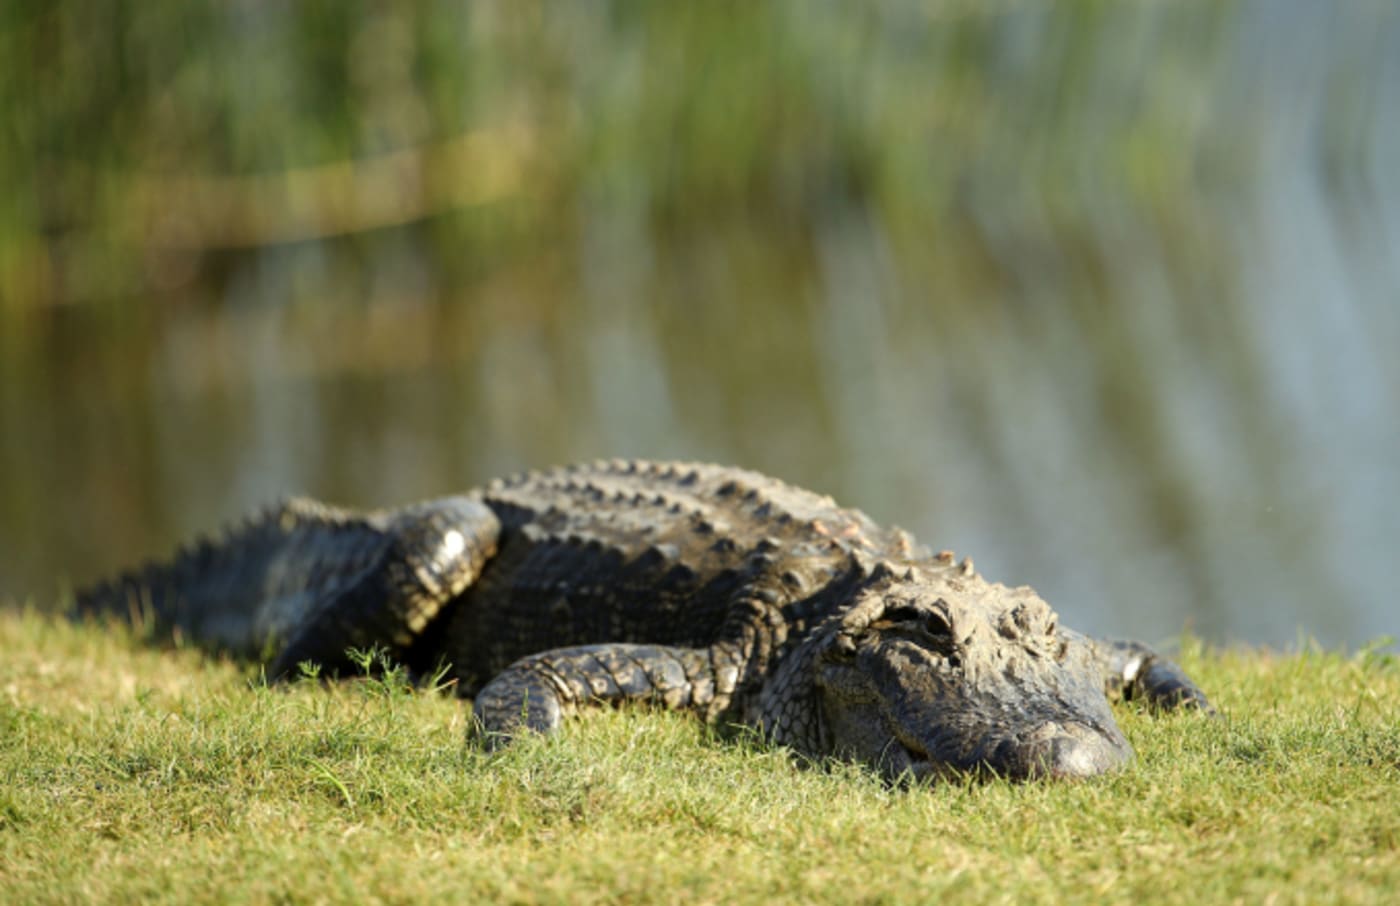 An alligator on the 18th green during the final round of the Zurich Classic